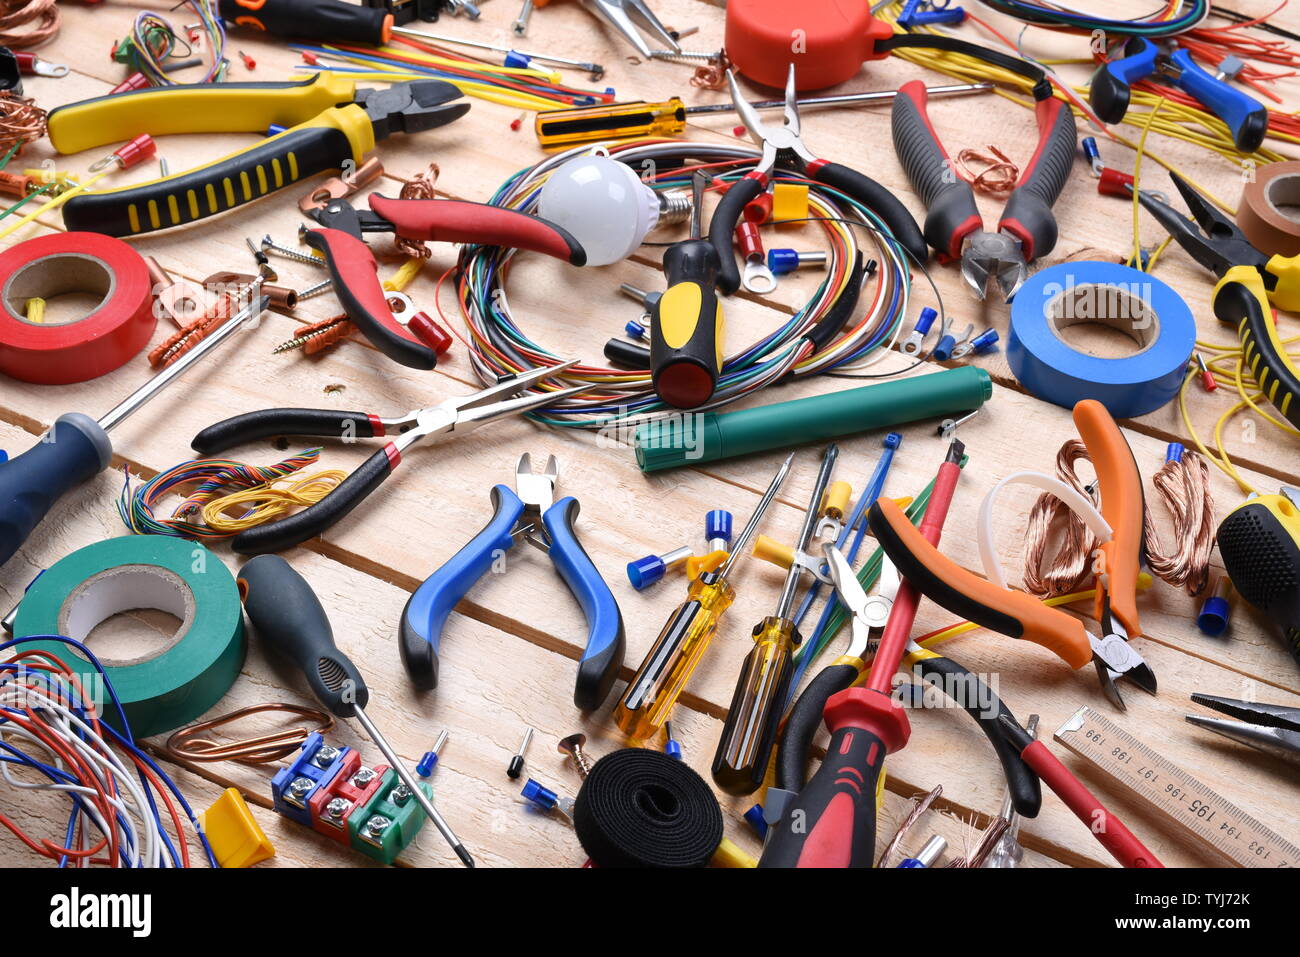 Electrician tool and component Stock Photo